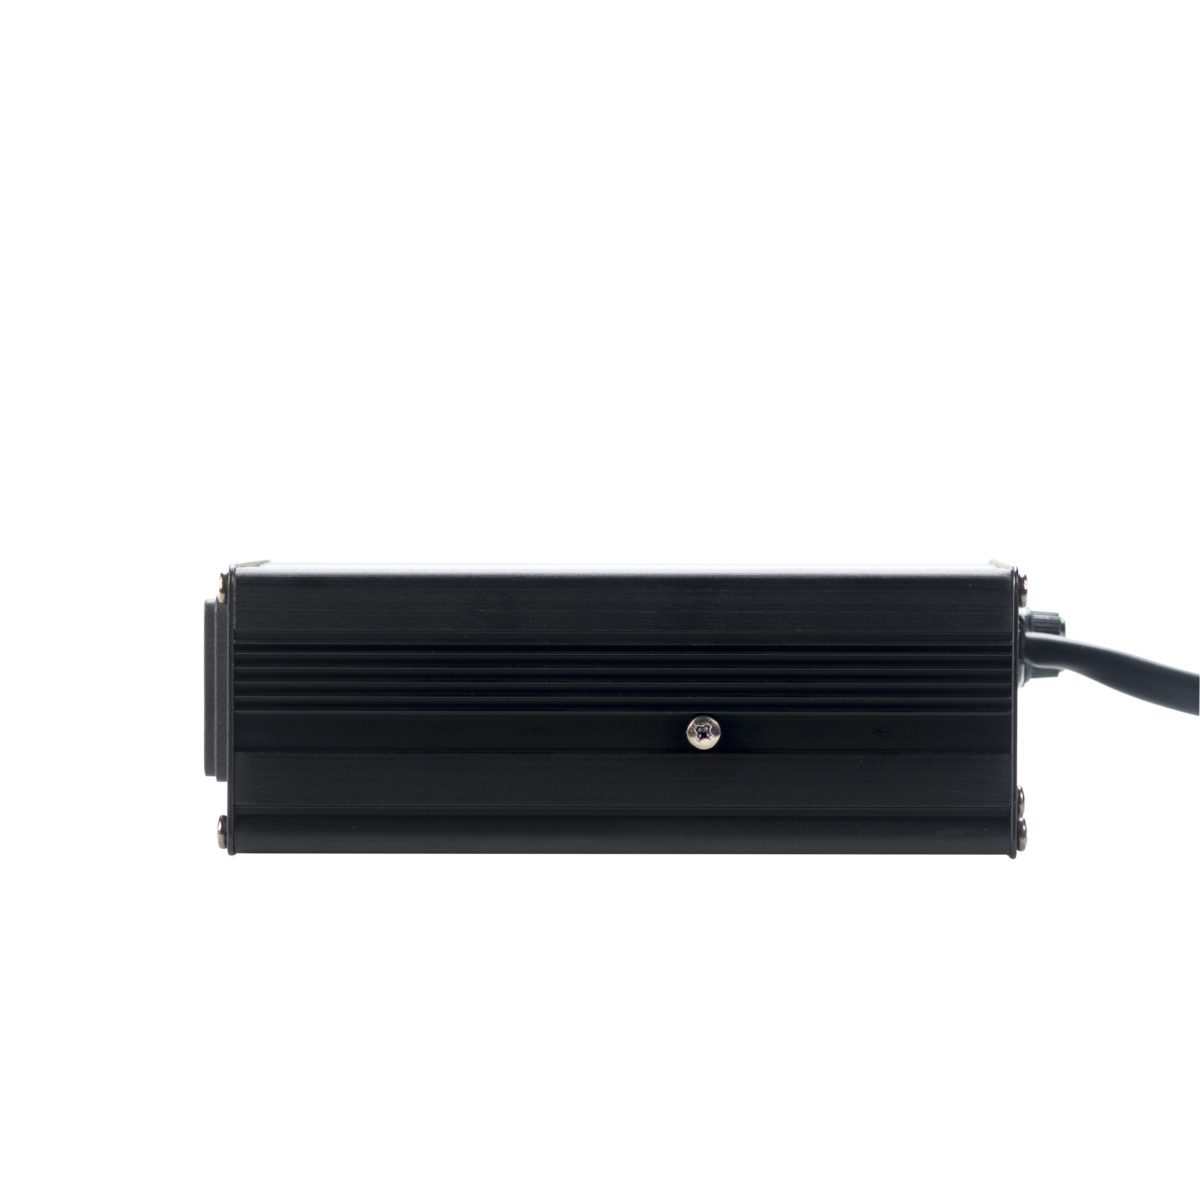 Rebelcell charger 12.6V6A product image